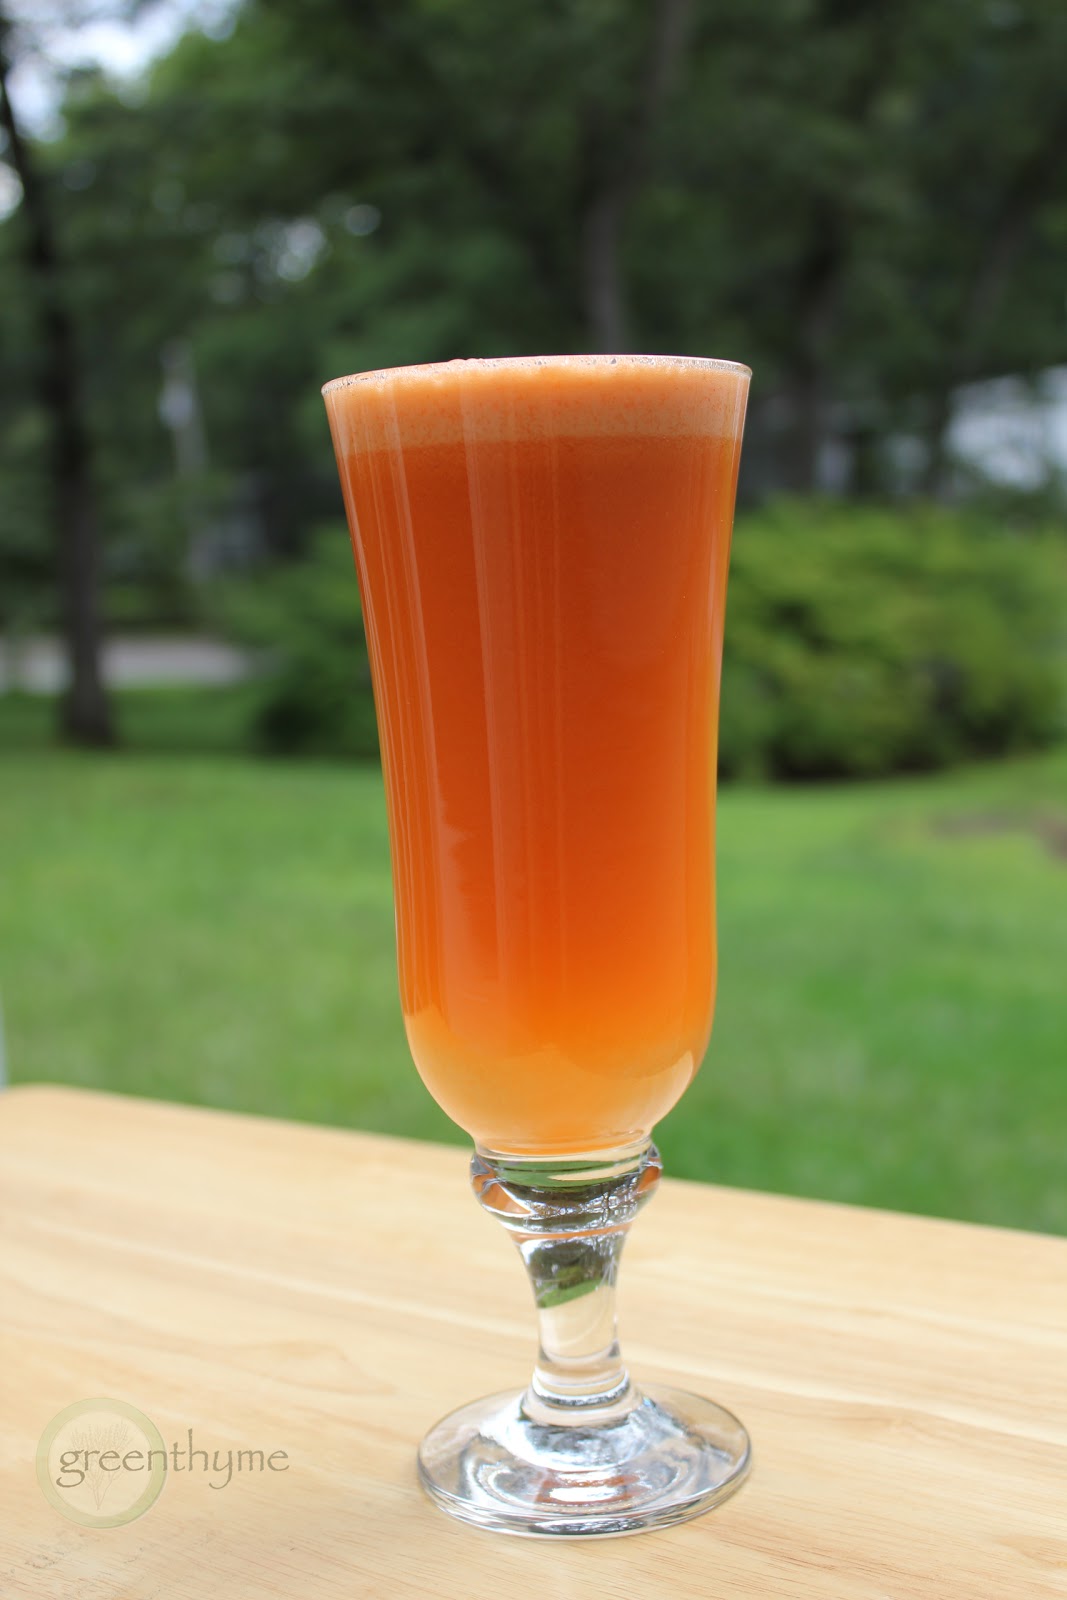 greenthyme: Carrot Apple Ginger Juice